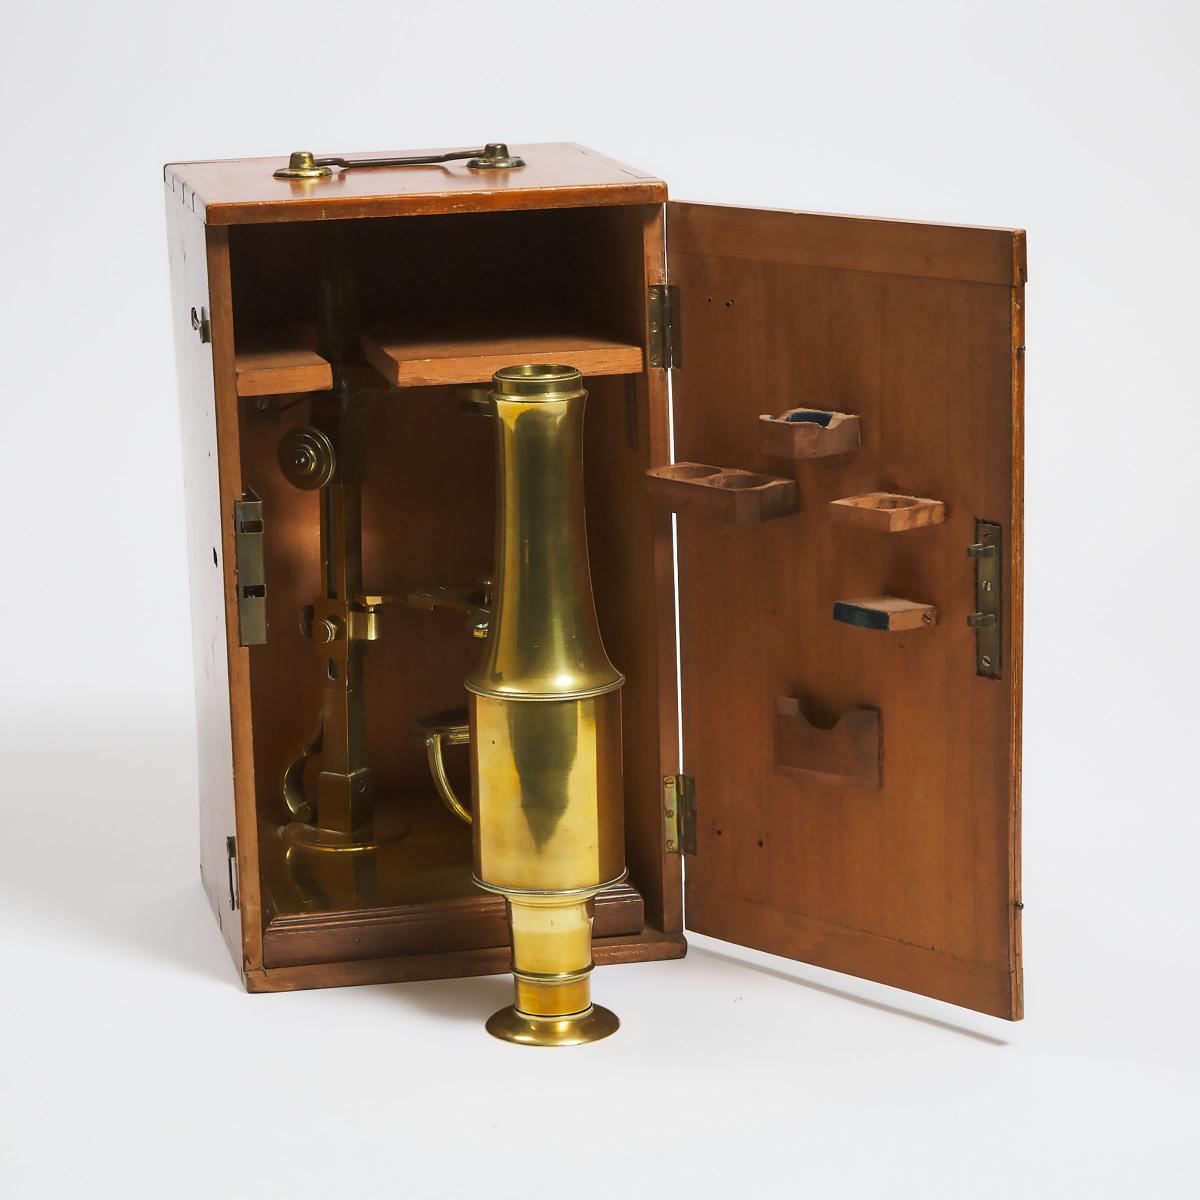 Lacquered Brass Monocular Compound Microscope, c.1830, adjustable height 20 in — 50.8 cm - Image 2 of 2